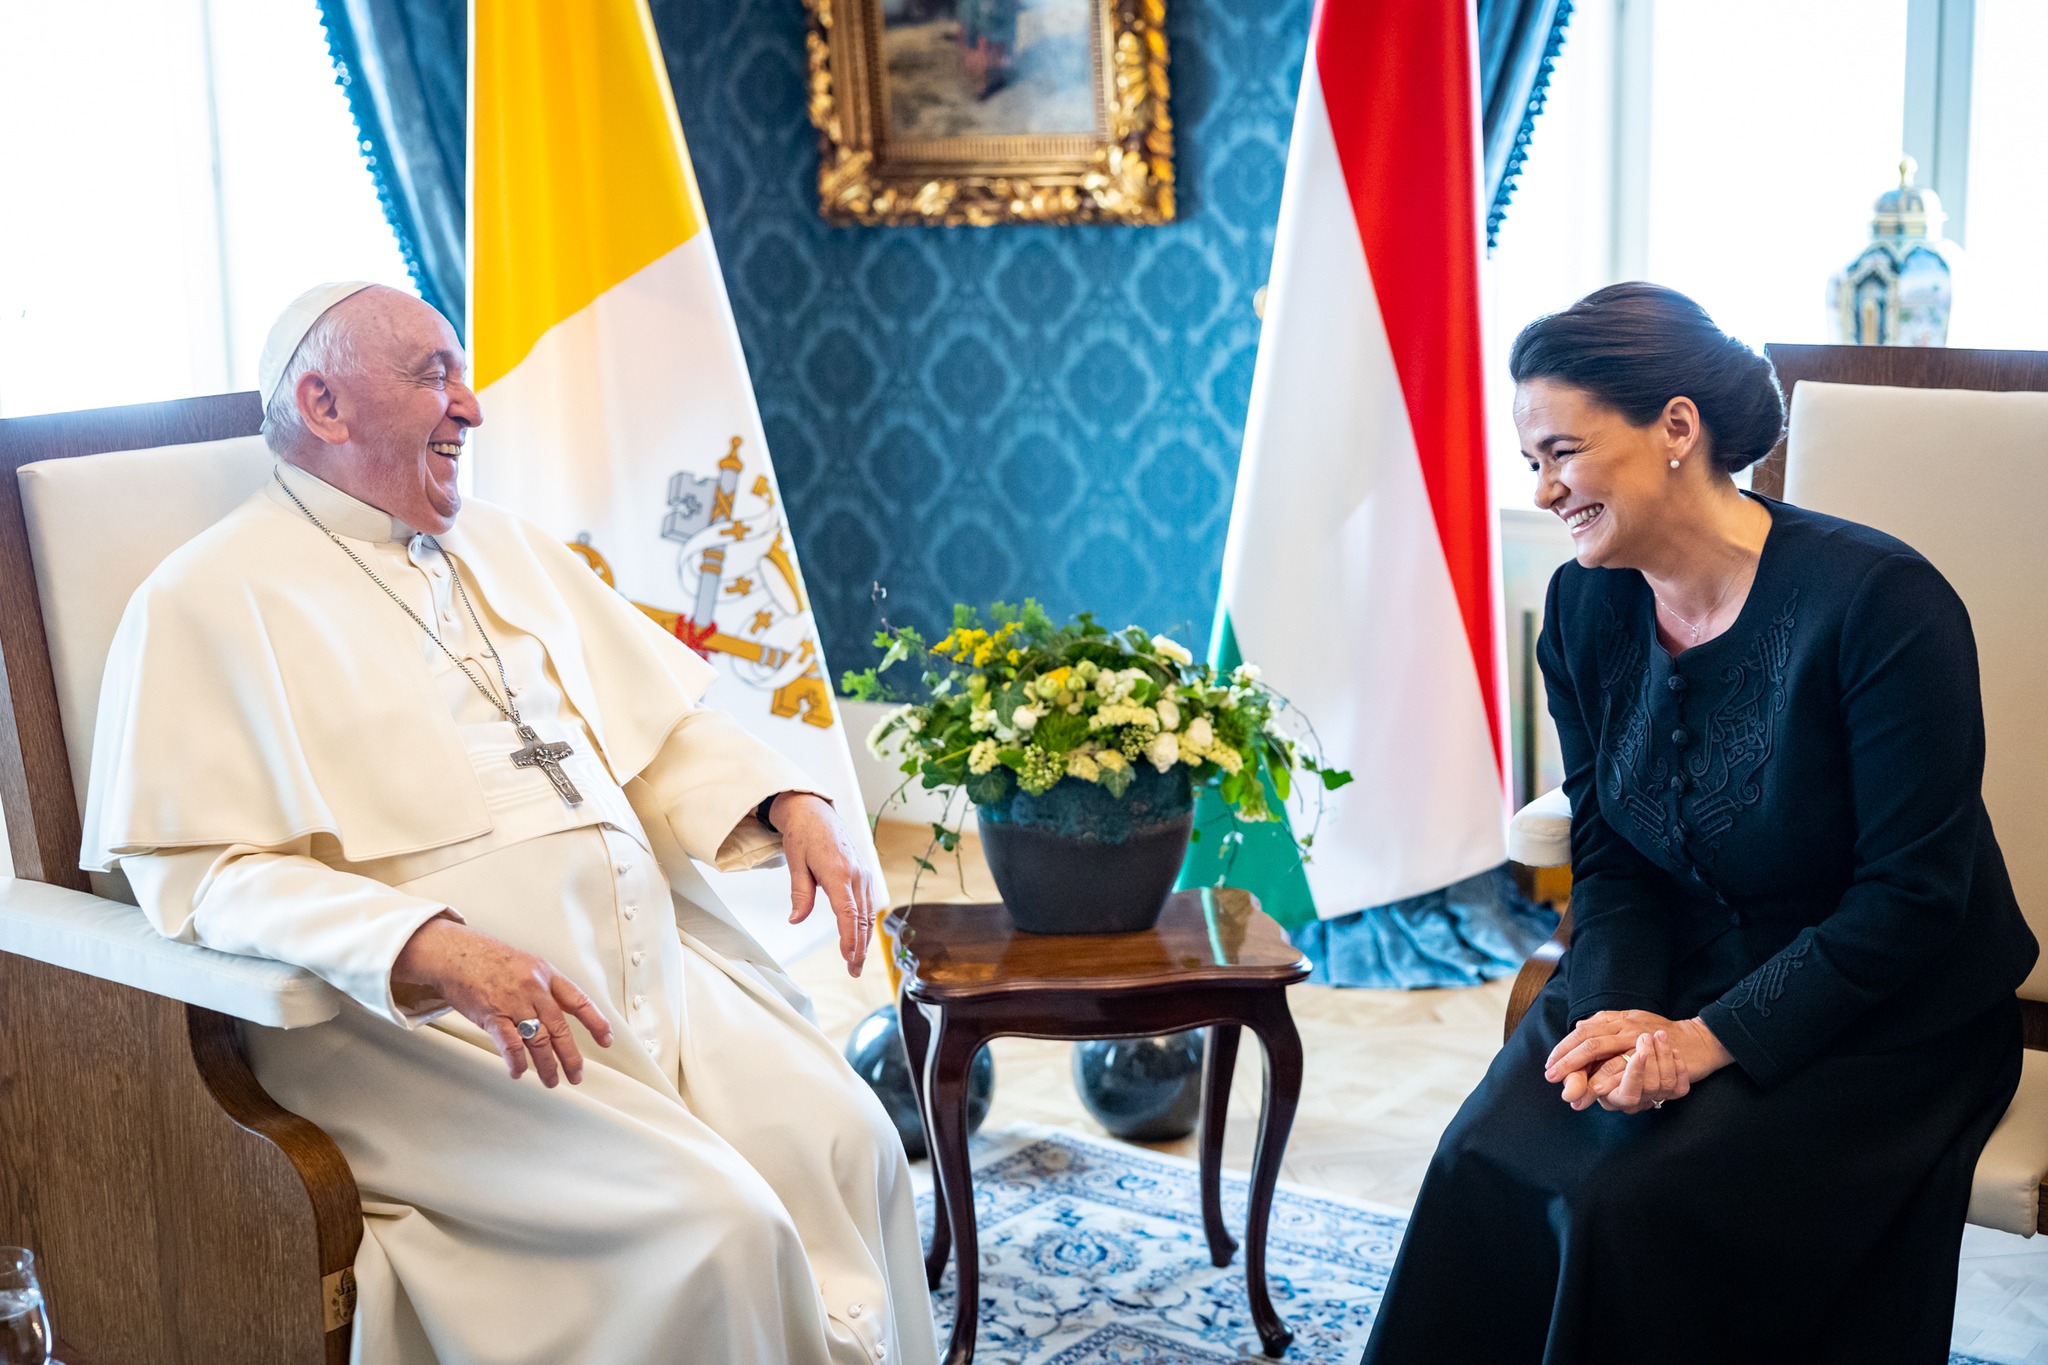 President Novák: It was good to be Hungarian during the Pope's visit